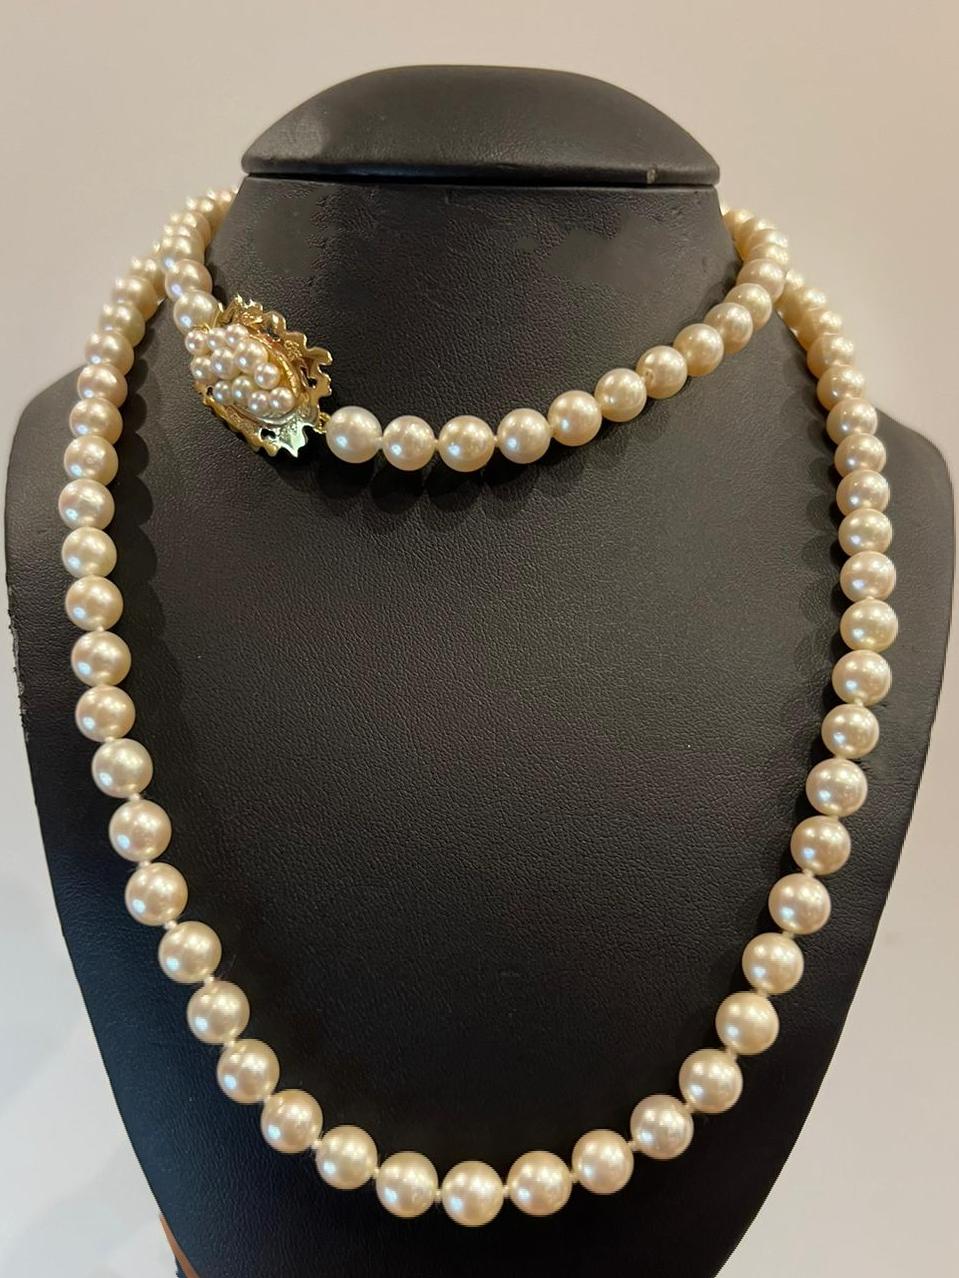 South Sea Pearl Opera Length 78cm (30.7 inches) Necklace 18K Gold & Pearl Clasp For Sale 1